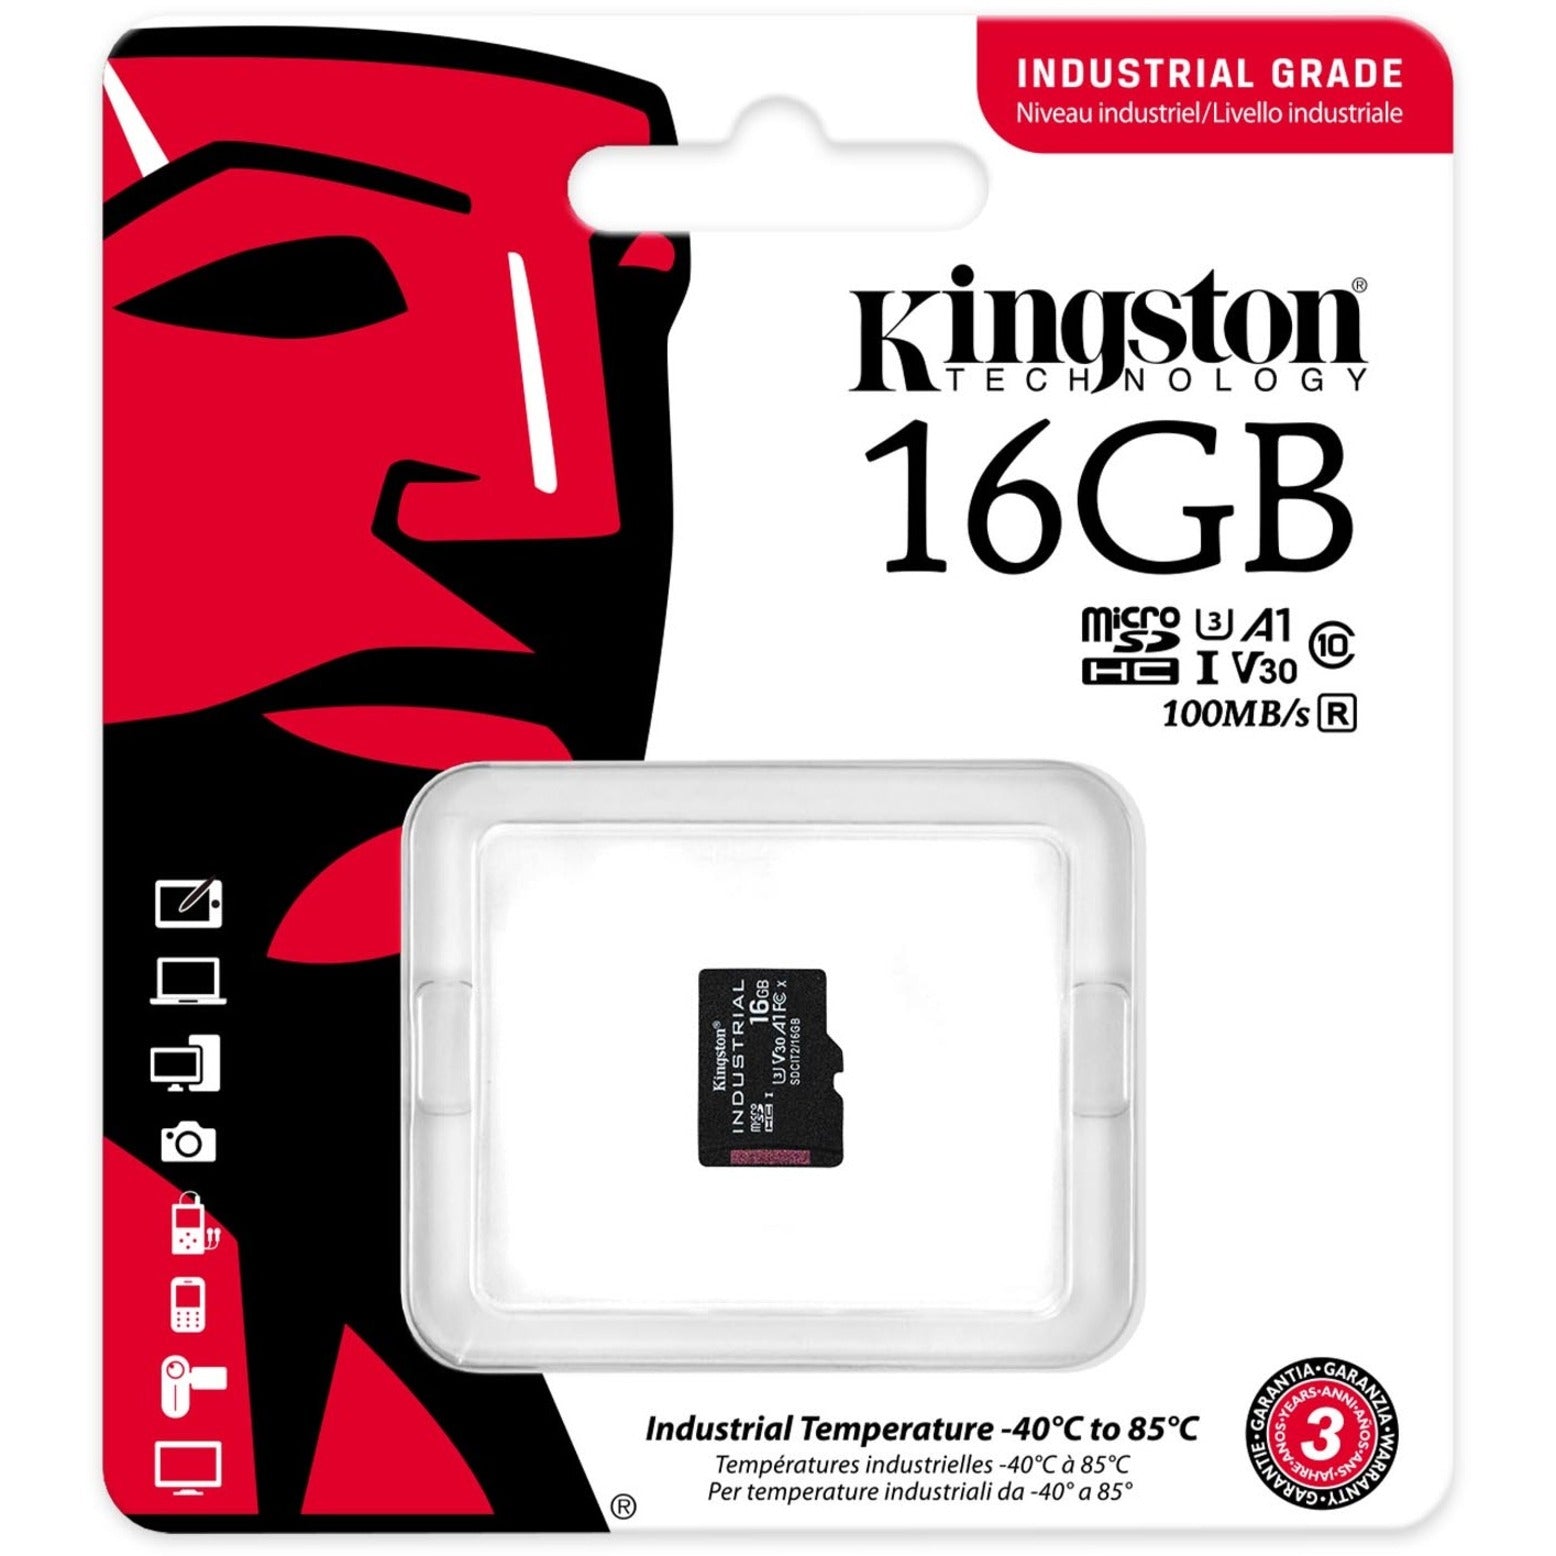 Kingston SDCIT2/16GBSP Industrial 16GB microSDHC Card, 100 MB/s Data Transfer Rate, V30 Video Speed Class